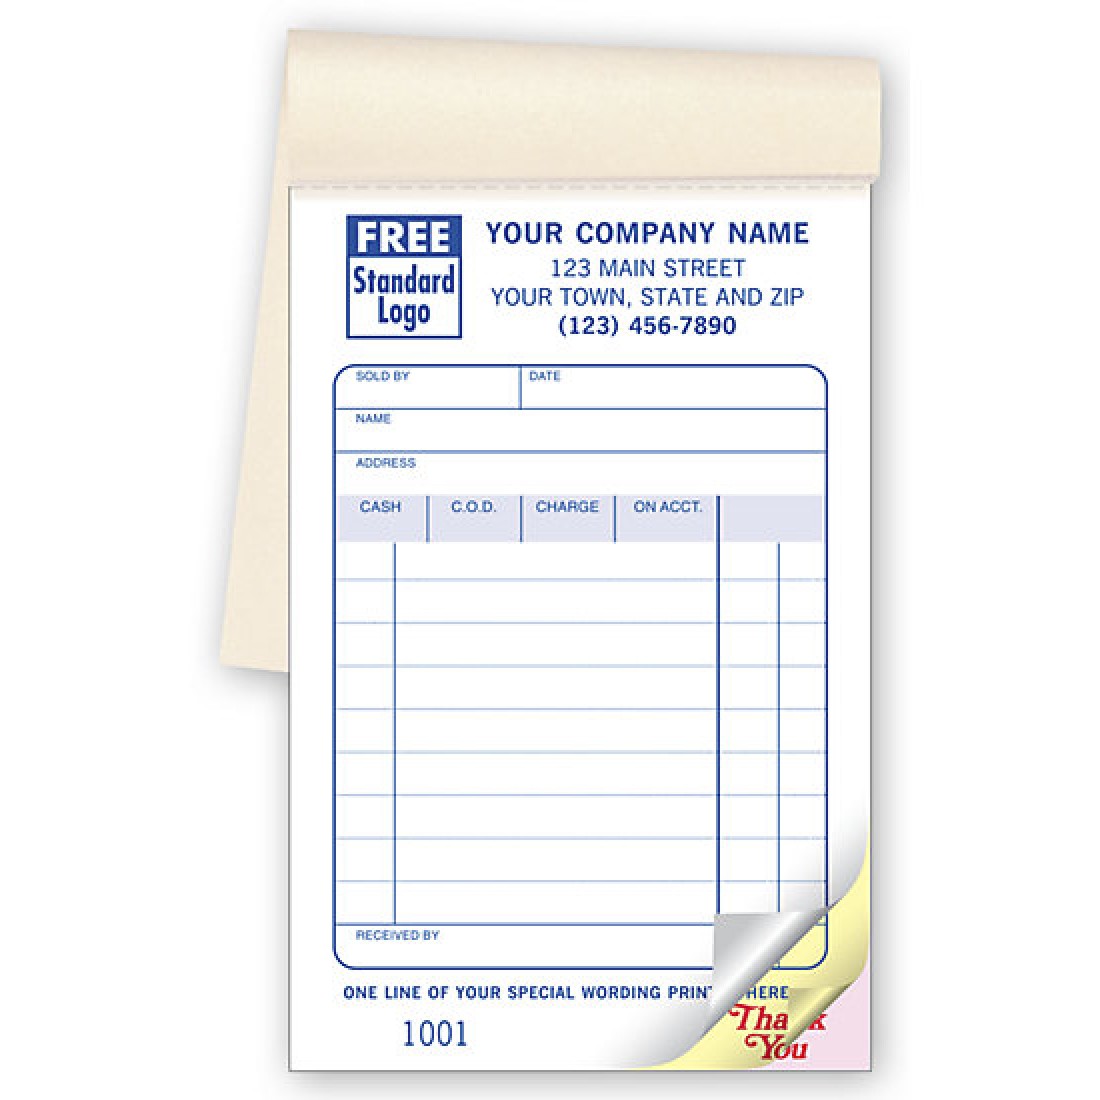 Name std. Receipt book. Printing on the Receipt. Pin the Receipt to book. Booklet Samples.